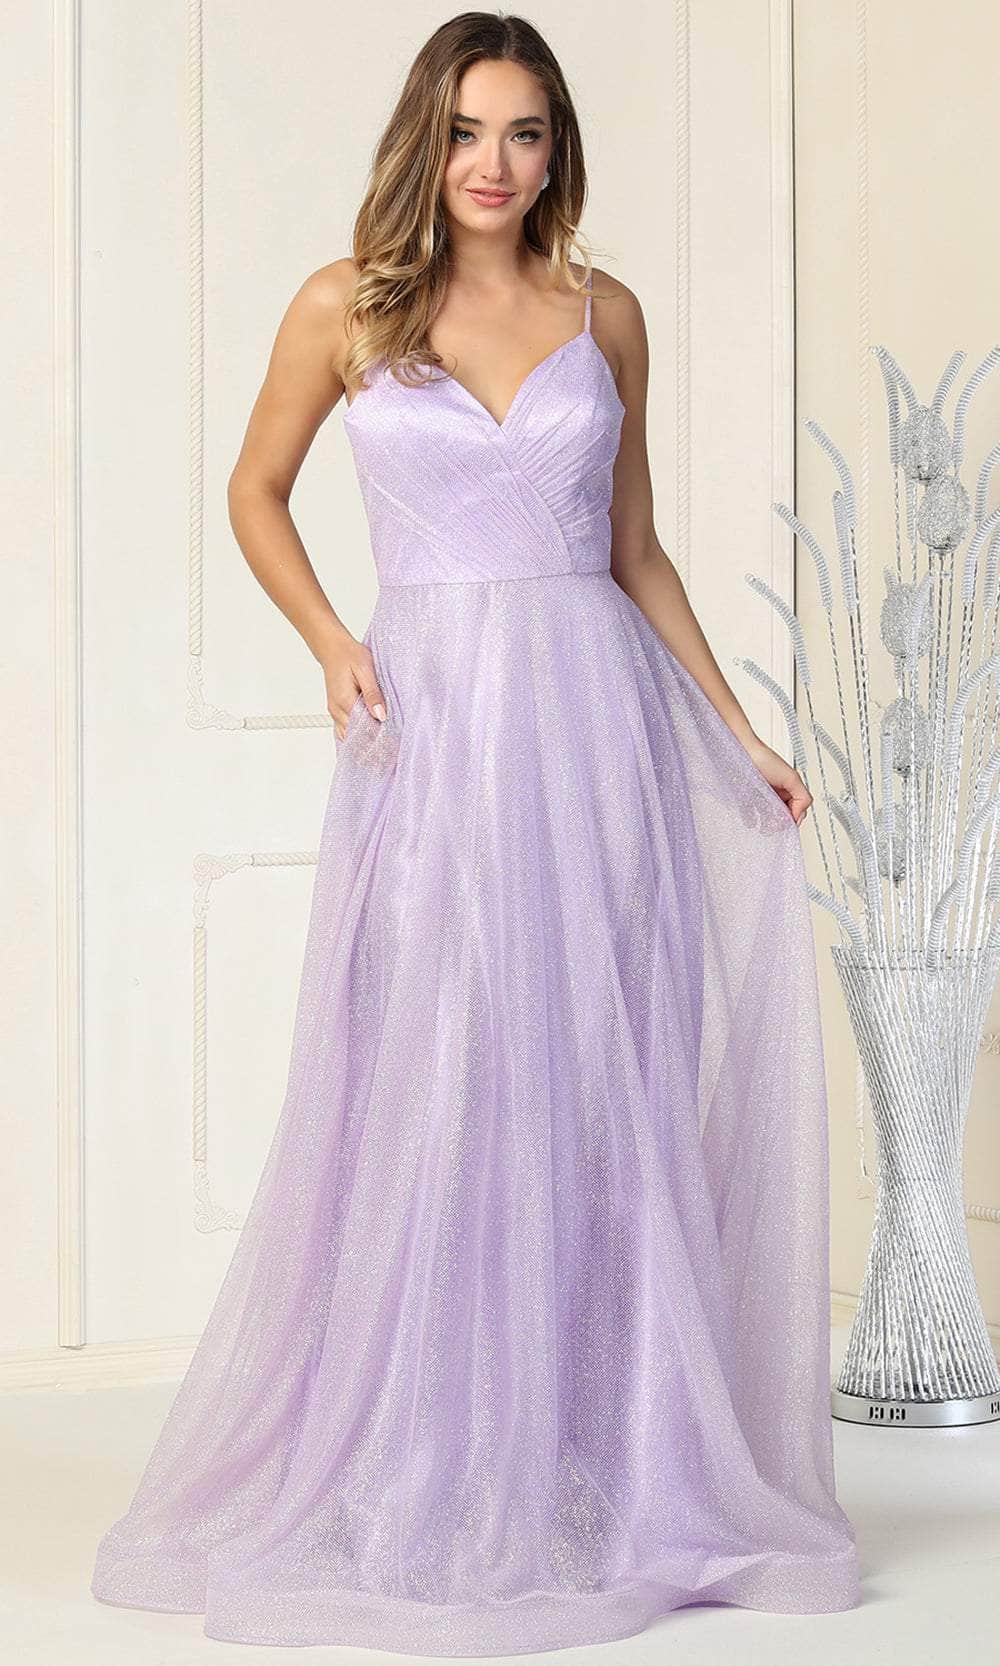 Image of May Queen MQ1838 - Sleeveless Glittered Tulle Surplice Evening Gown